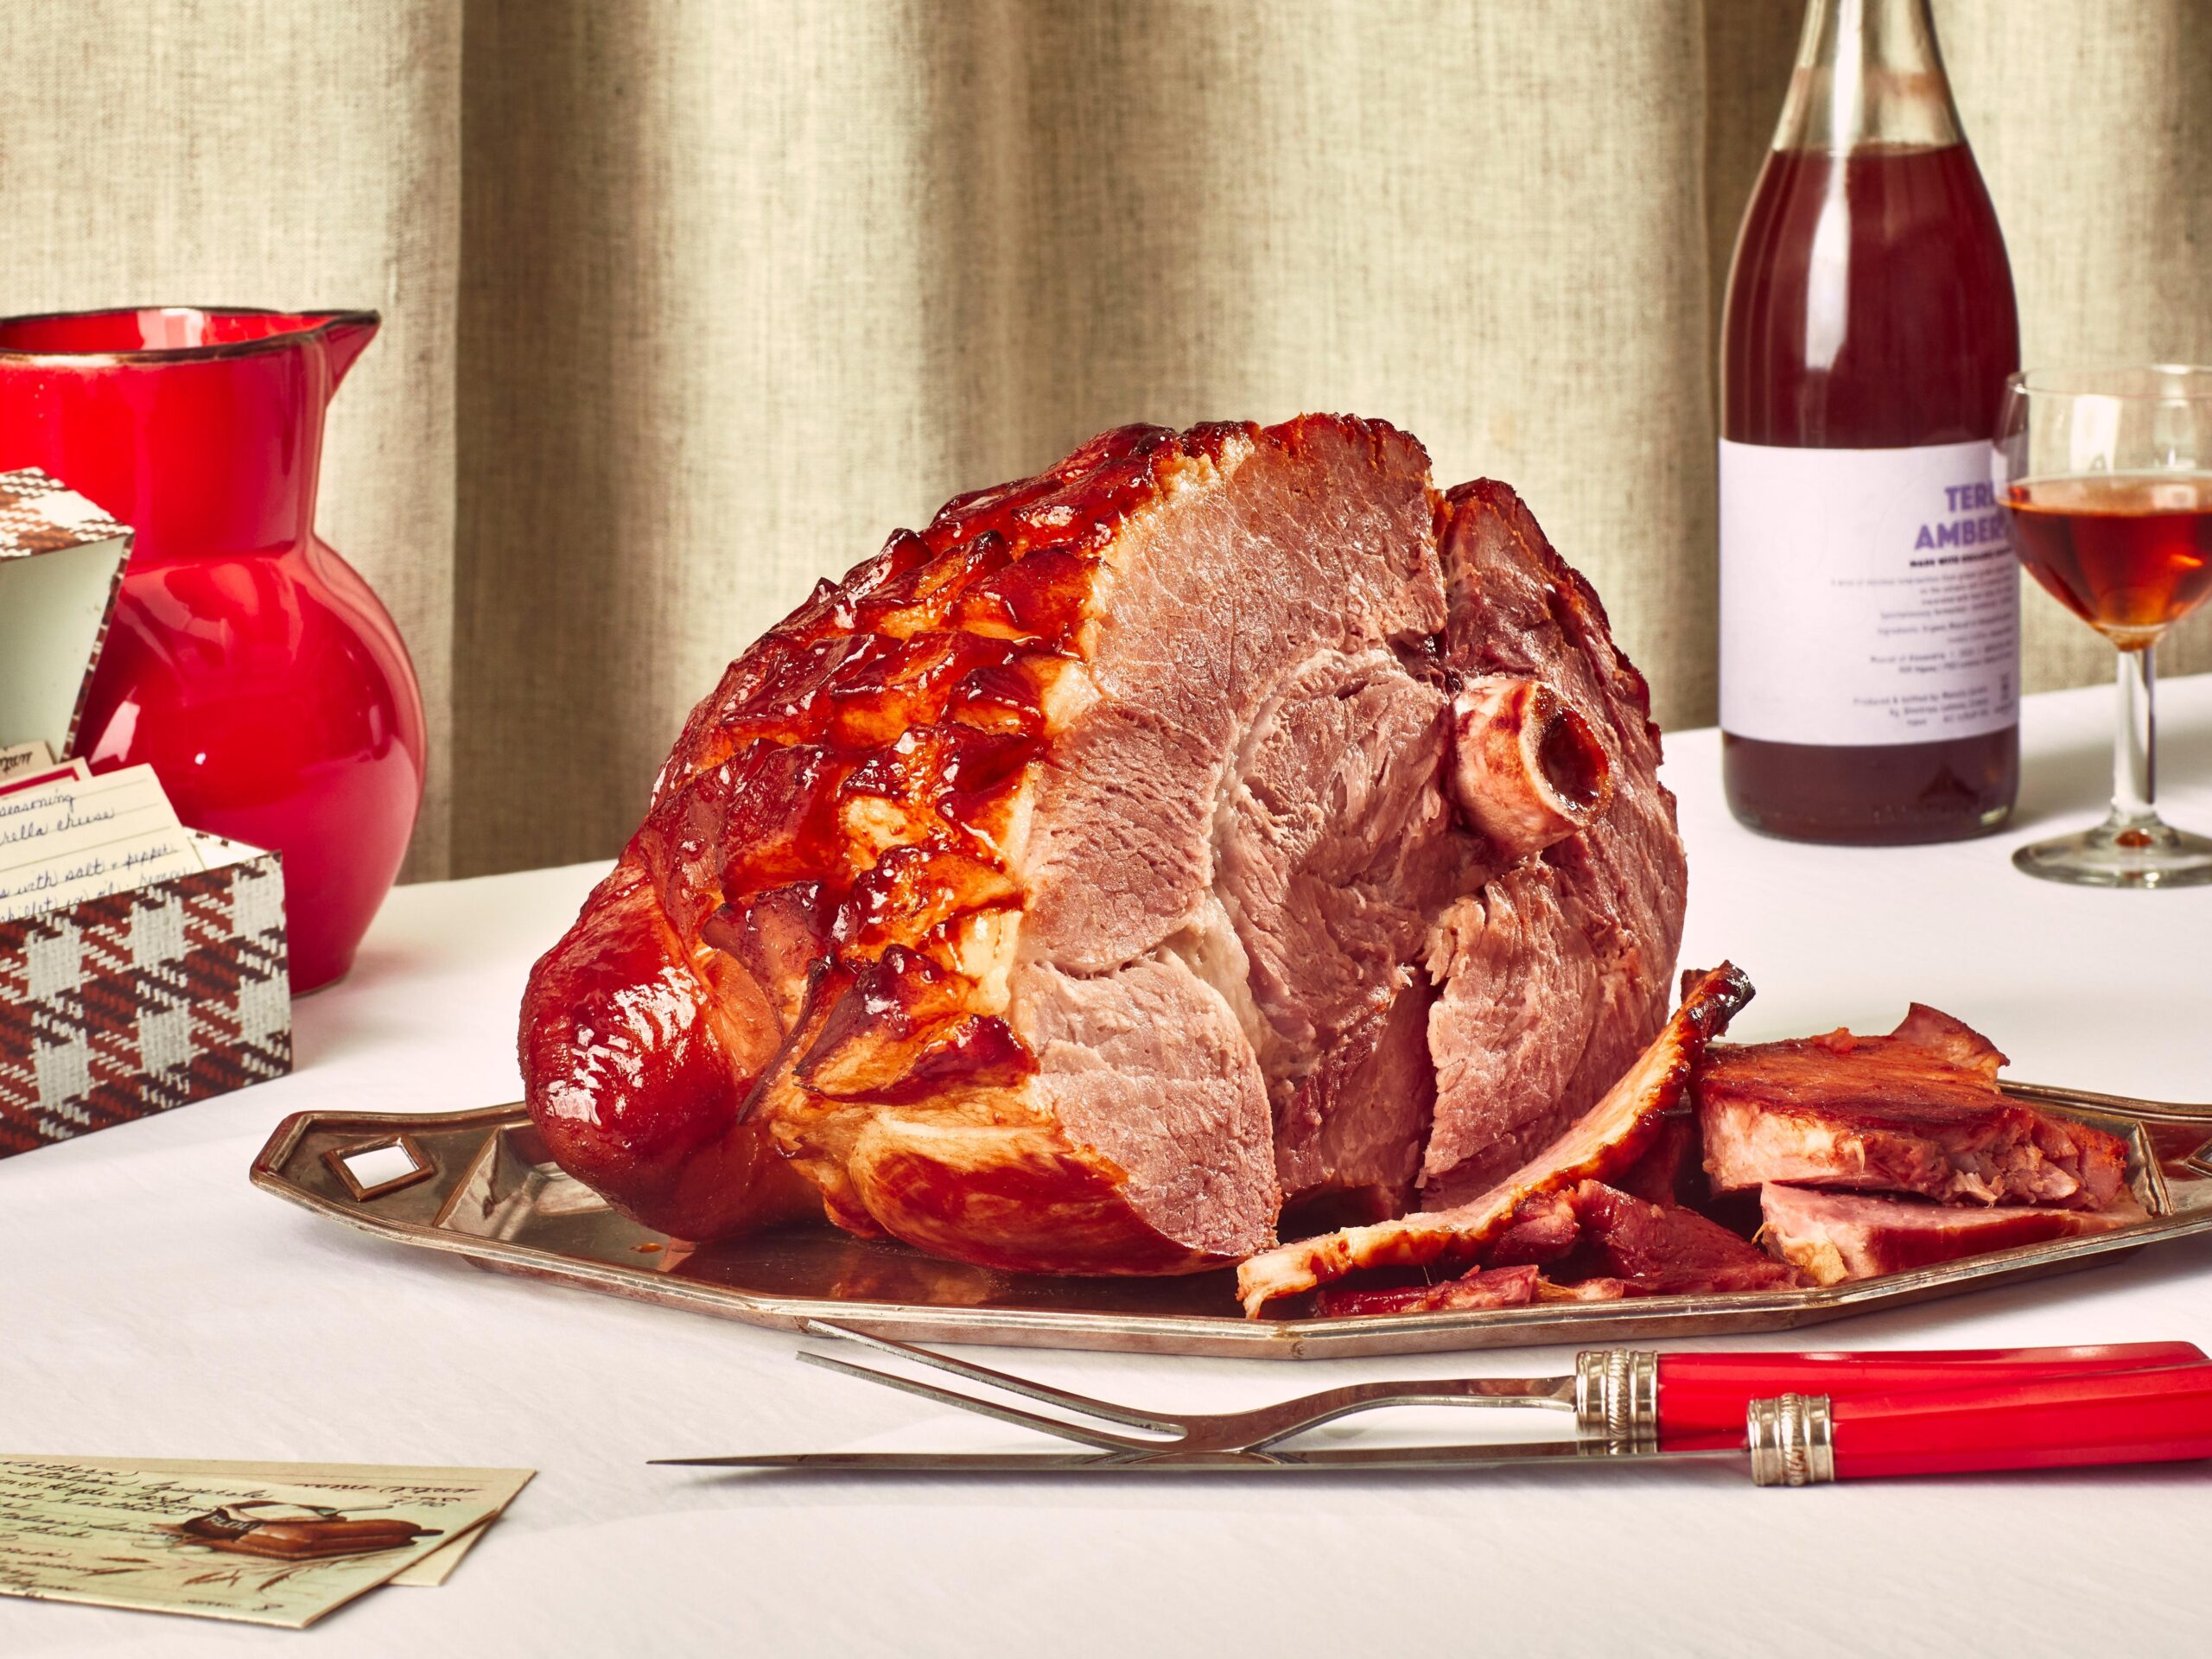  A touch of wine takes this ham to the next level